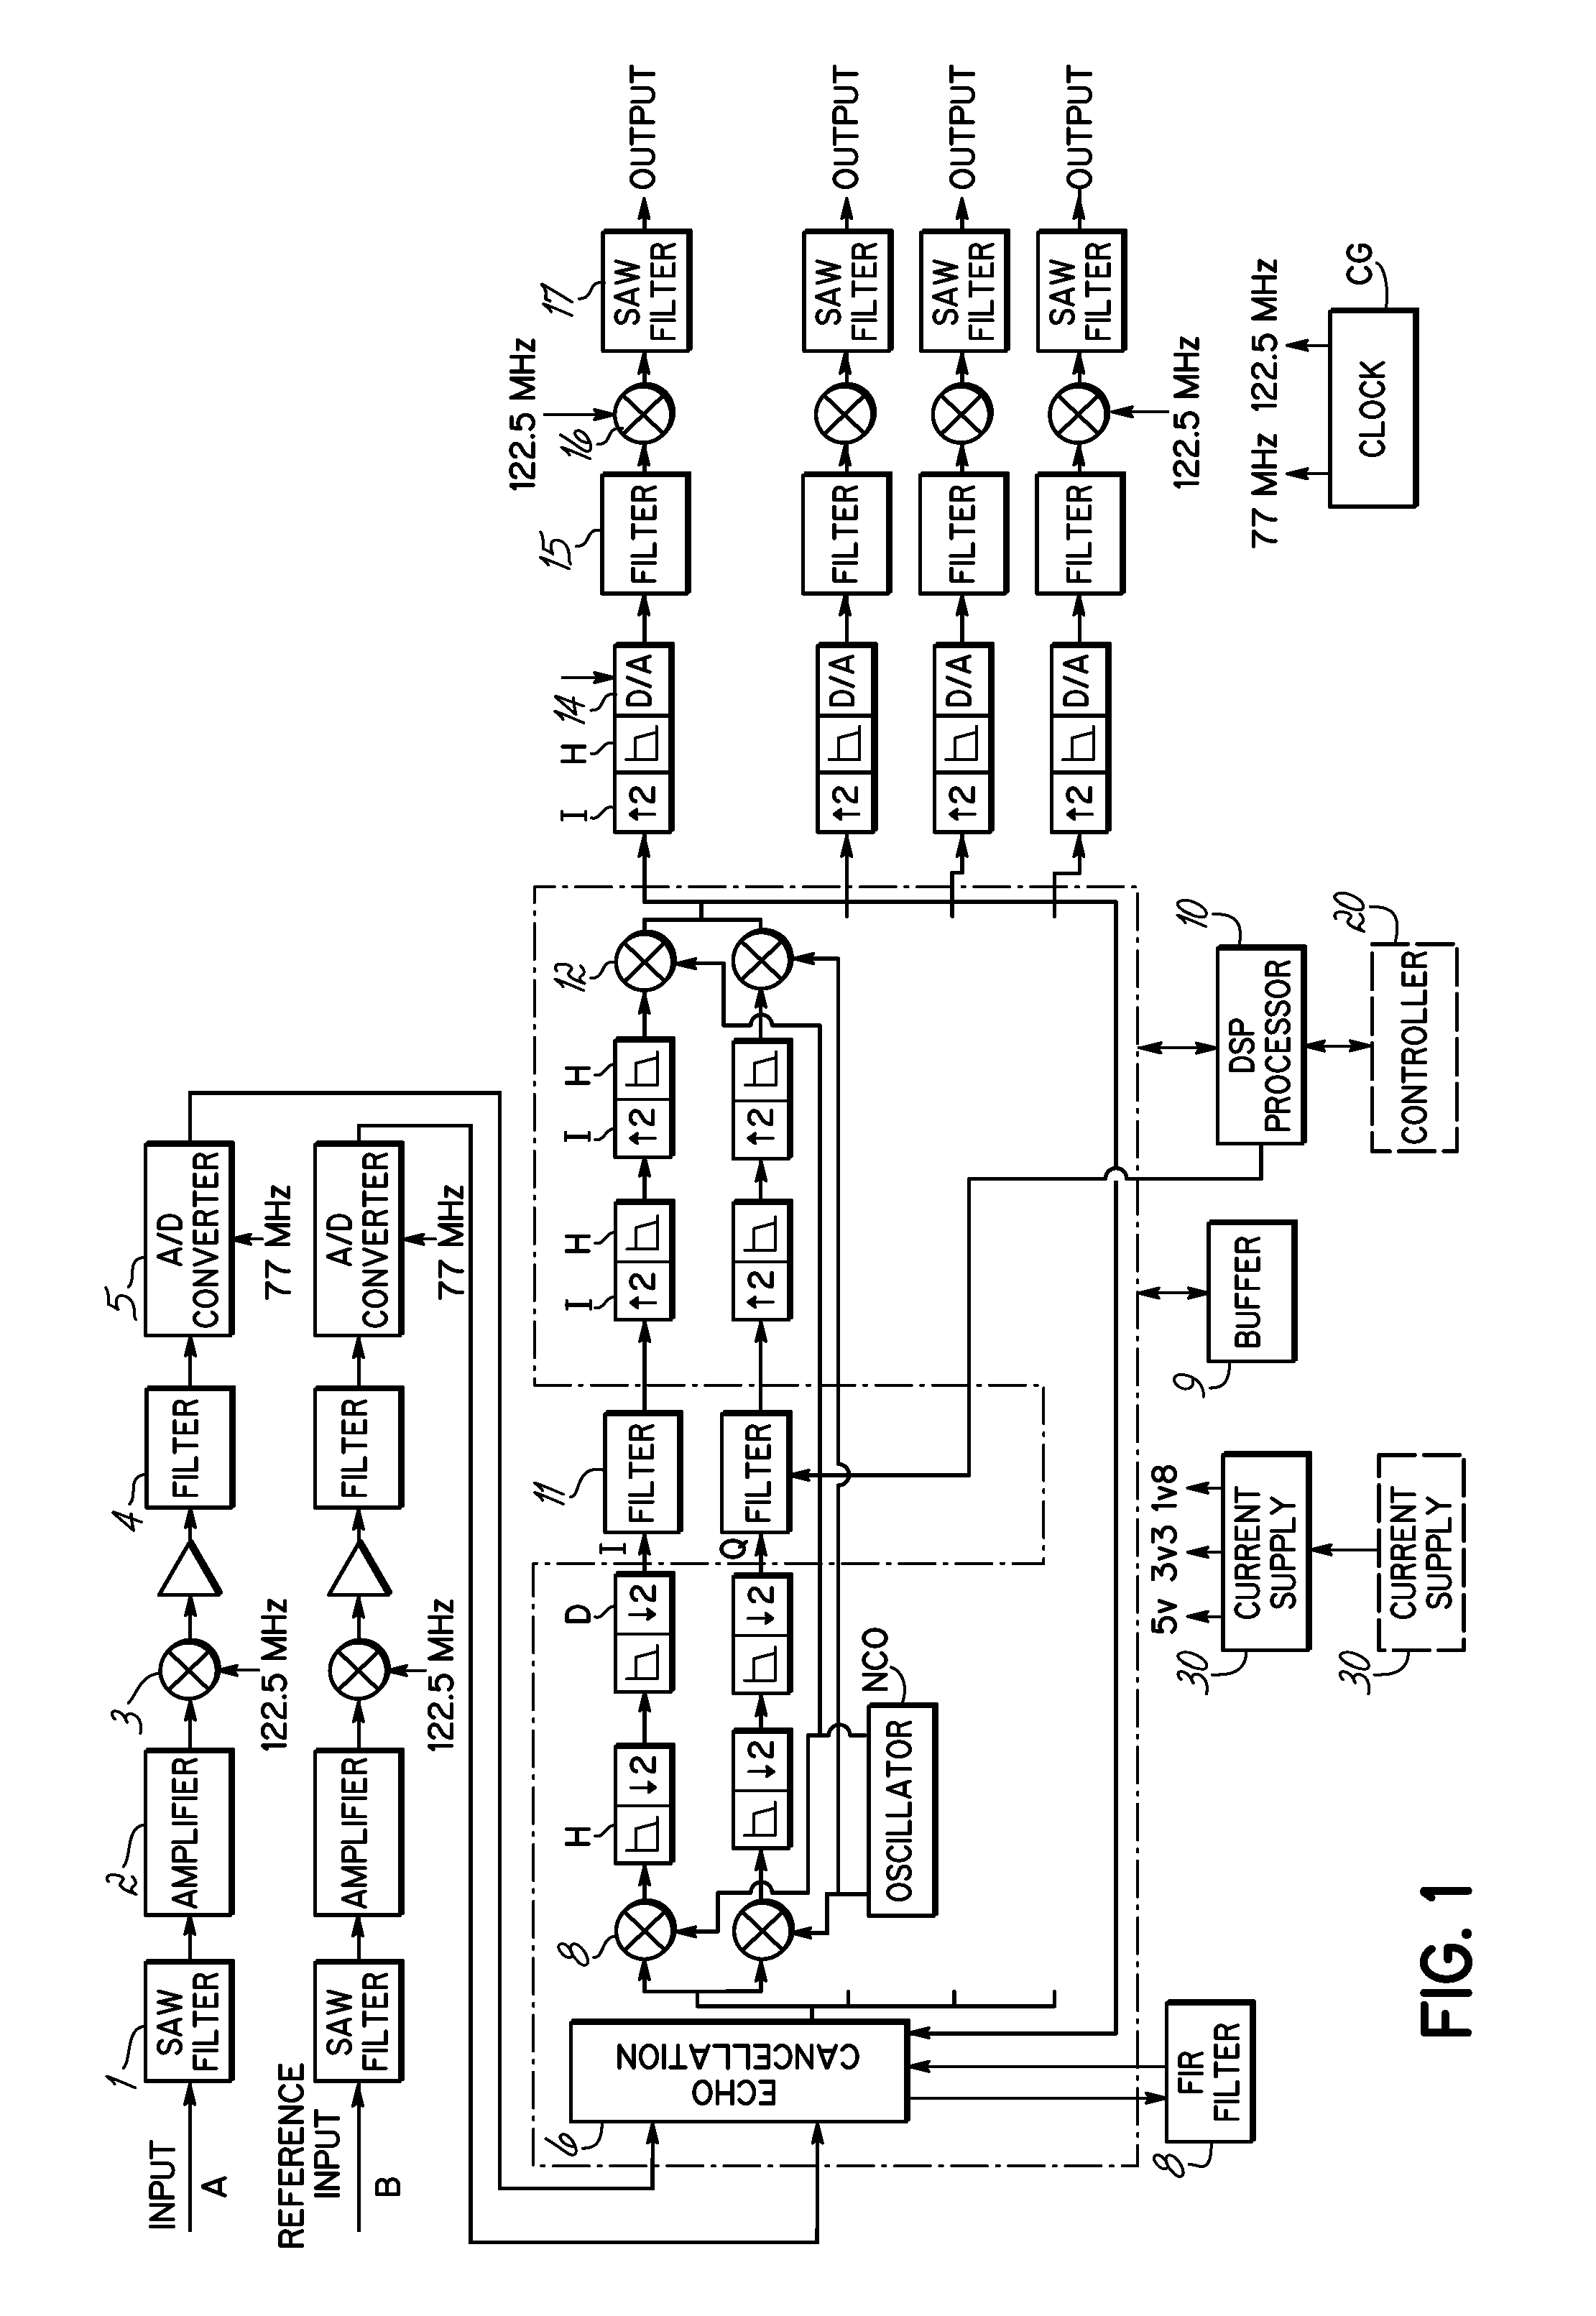 Digital repeater having bandpass filtering, adaptive pre-equalization and suppression of natural oscillation